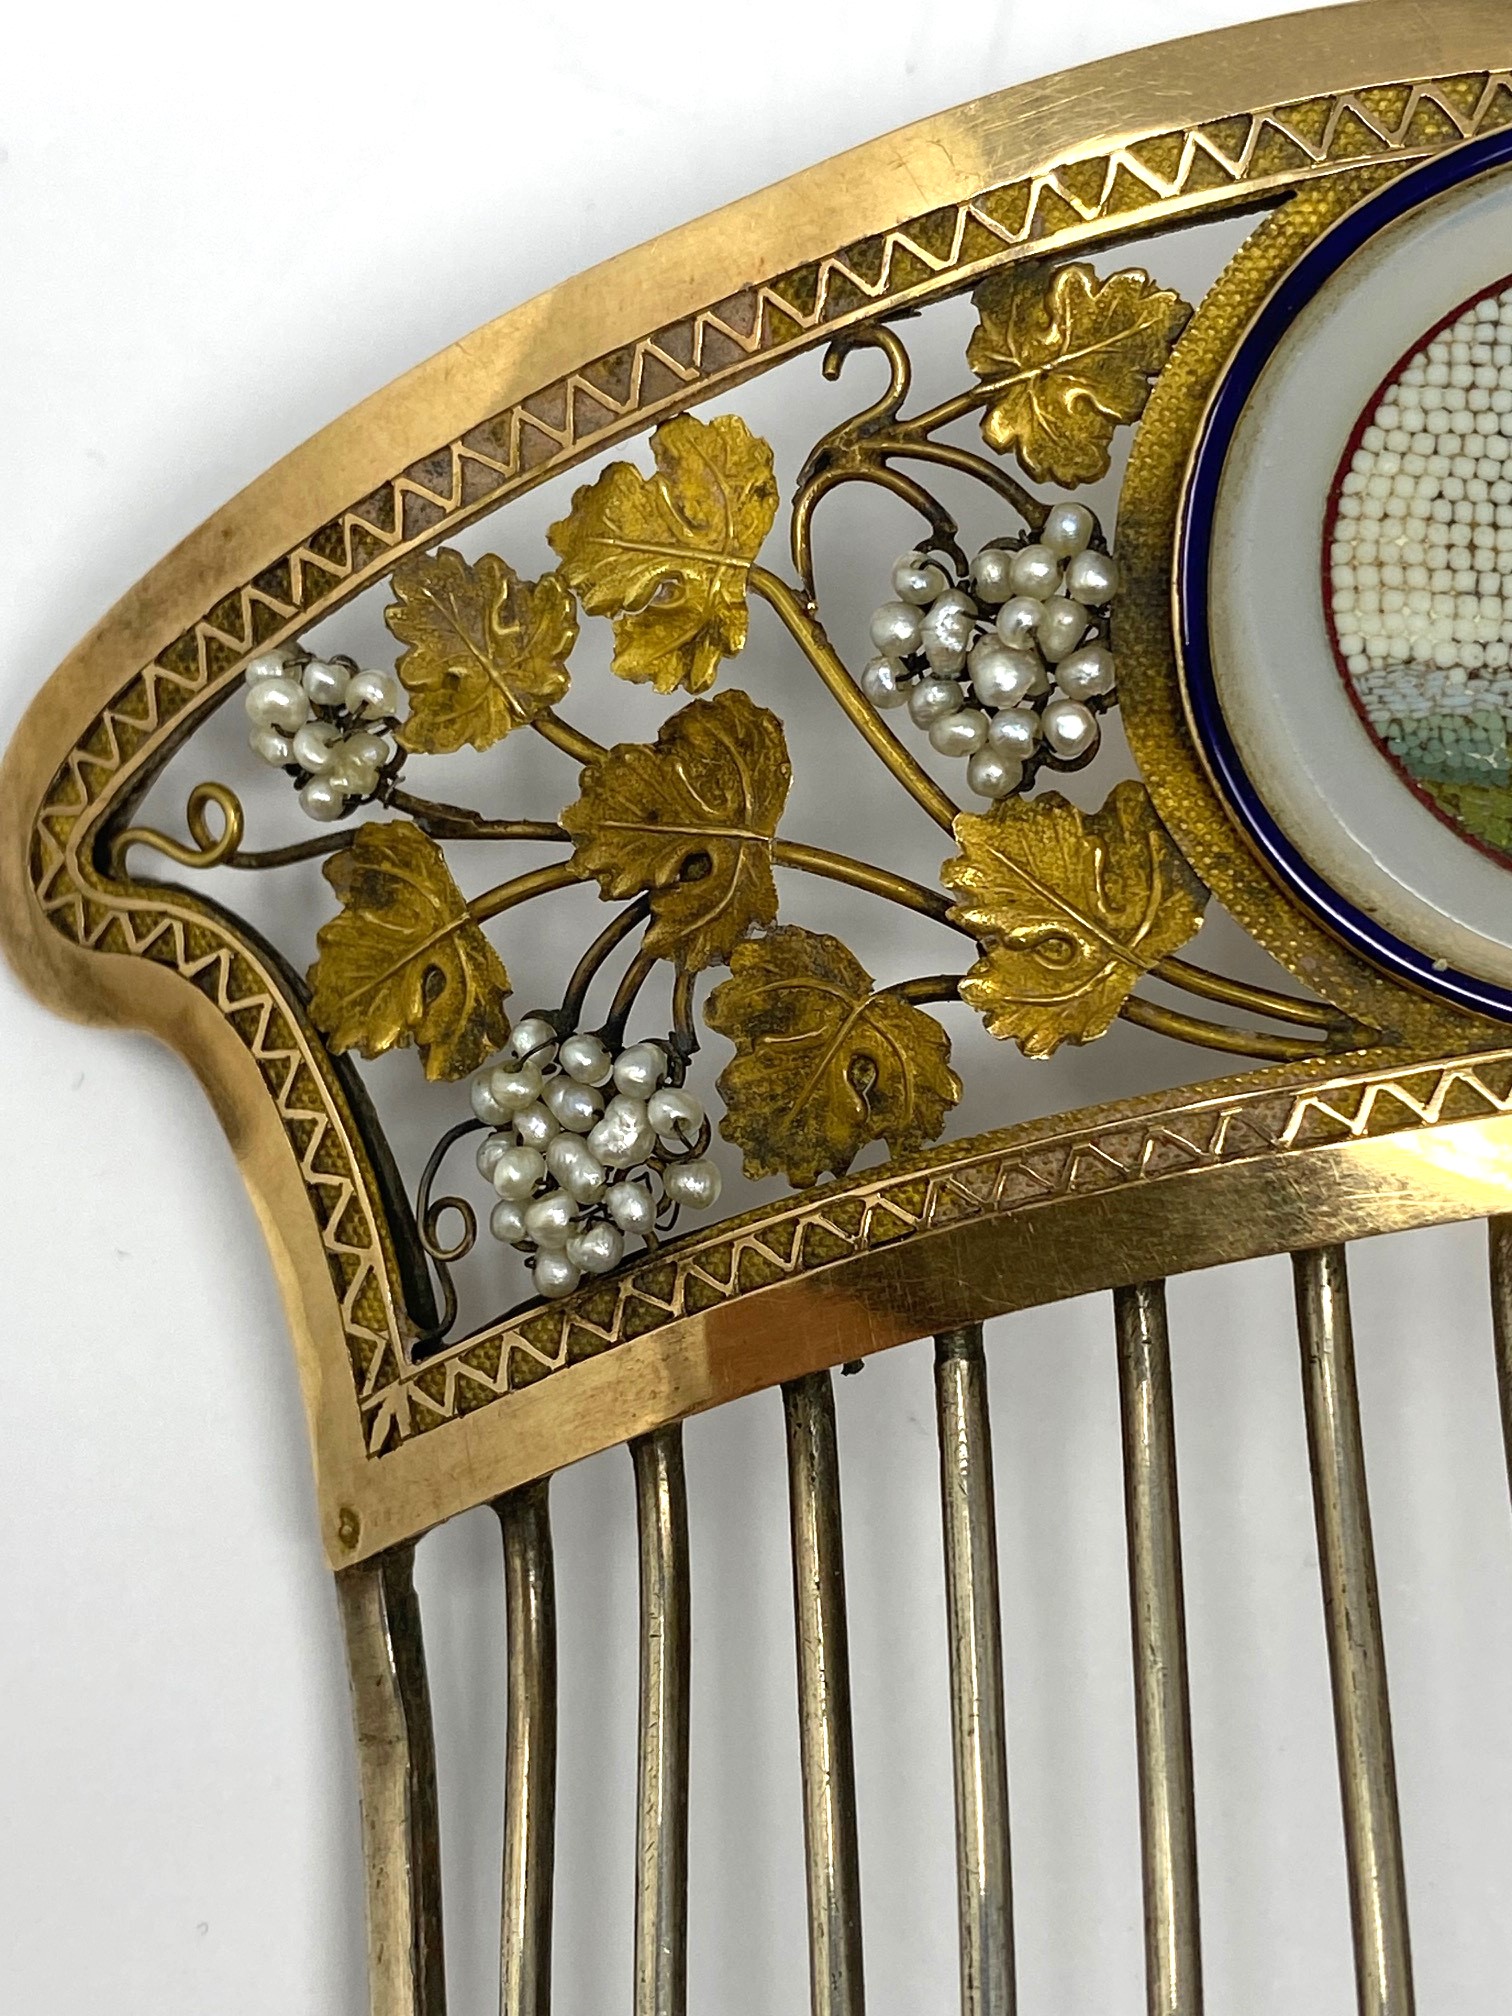 A FRENCH SILVER, GOLD AND MICROMOSAIC HAIR COMB, PARIS, 1798-1809 - Image 5 of 8